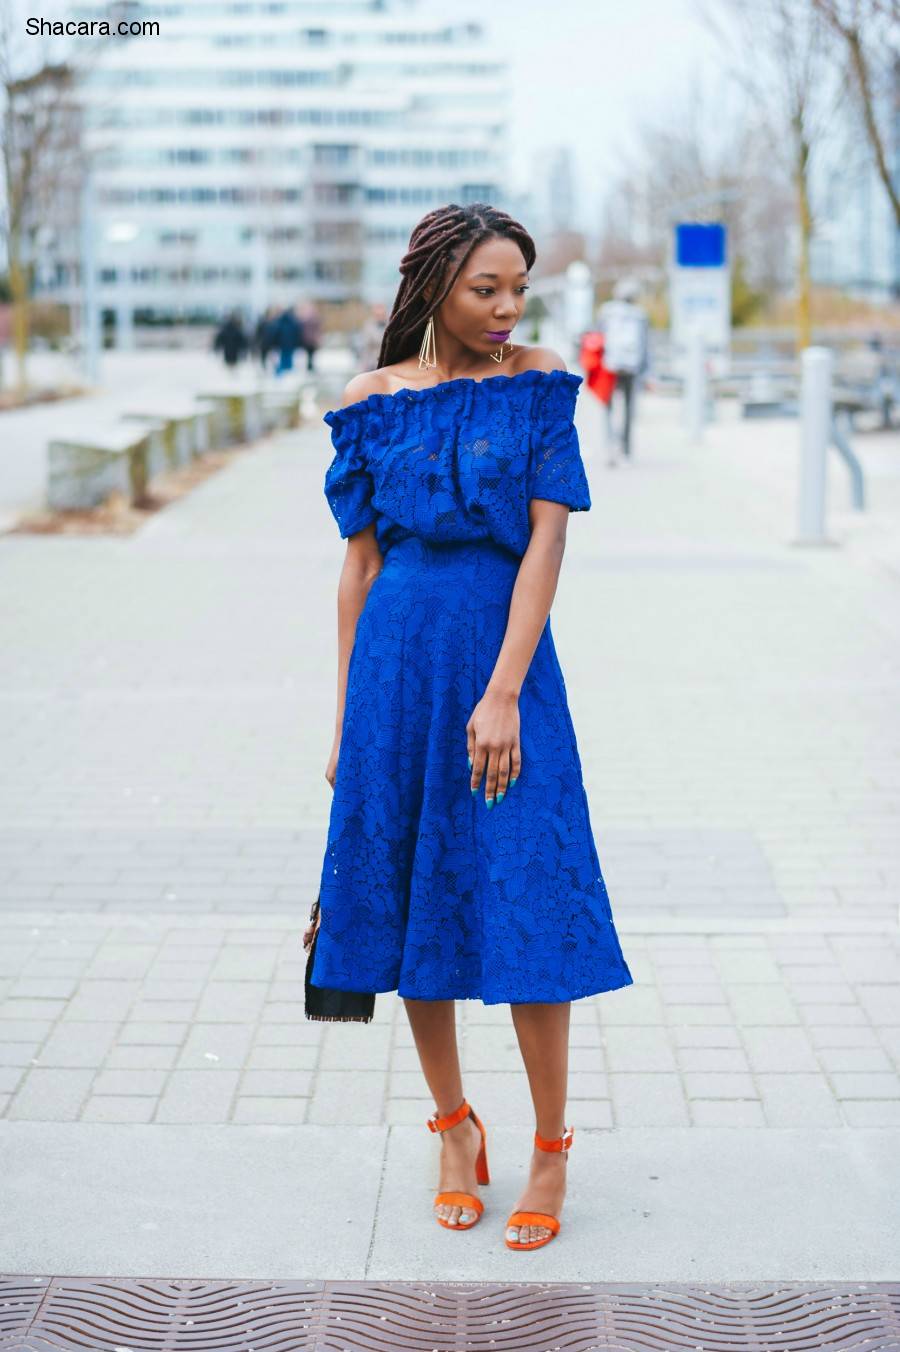 WEDDING GUEST OUTFIT 101: THE CURVY LADIES